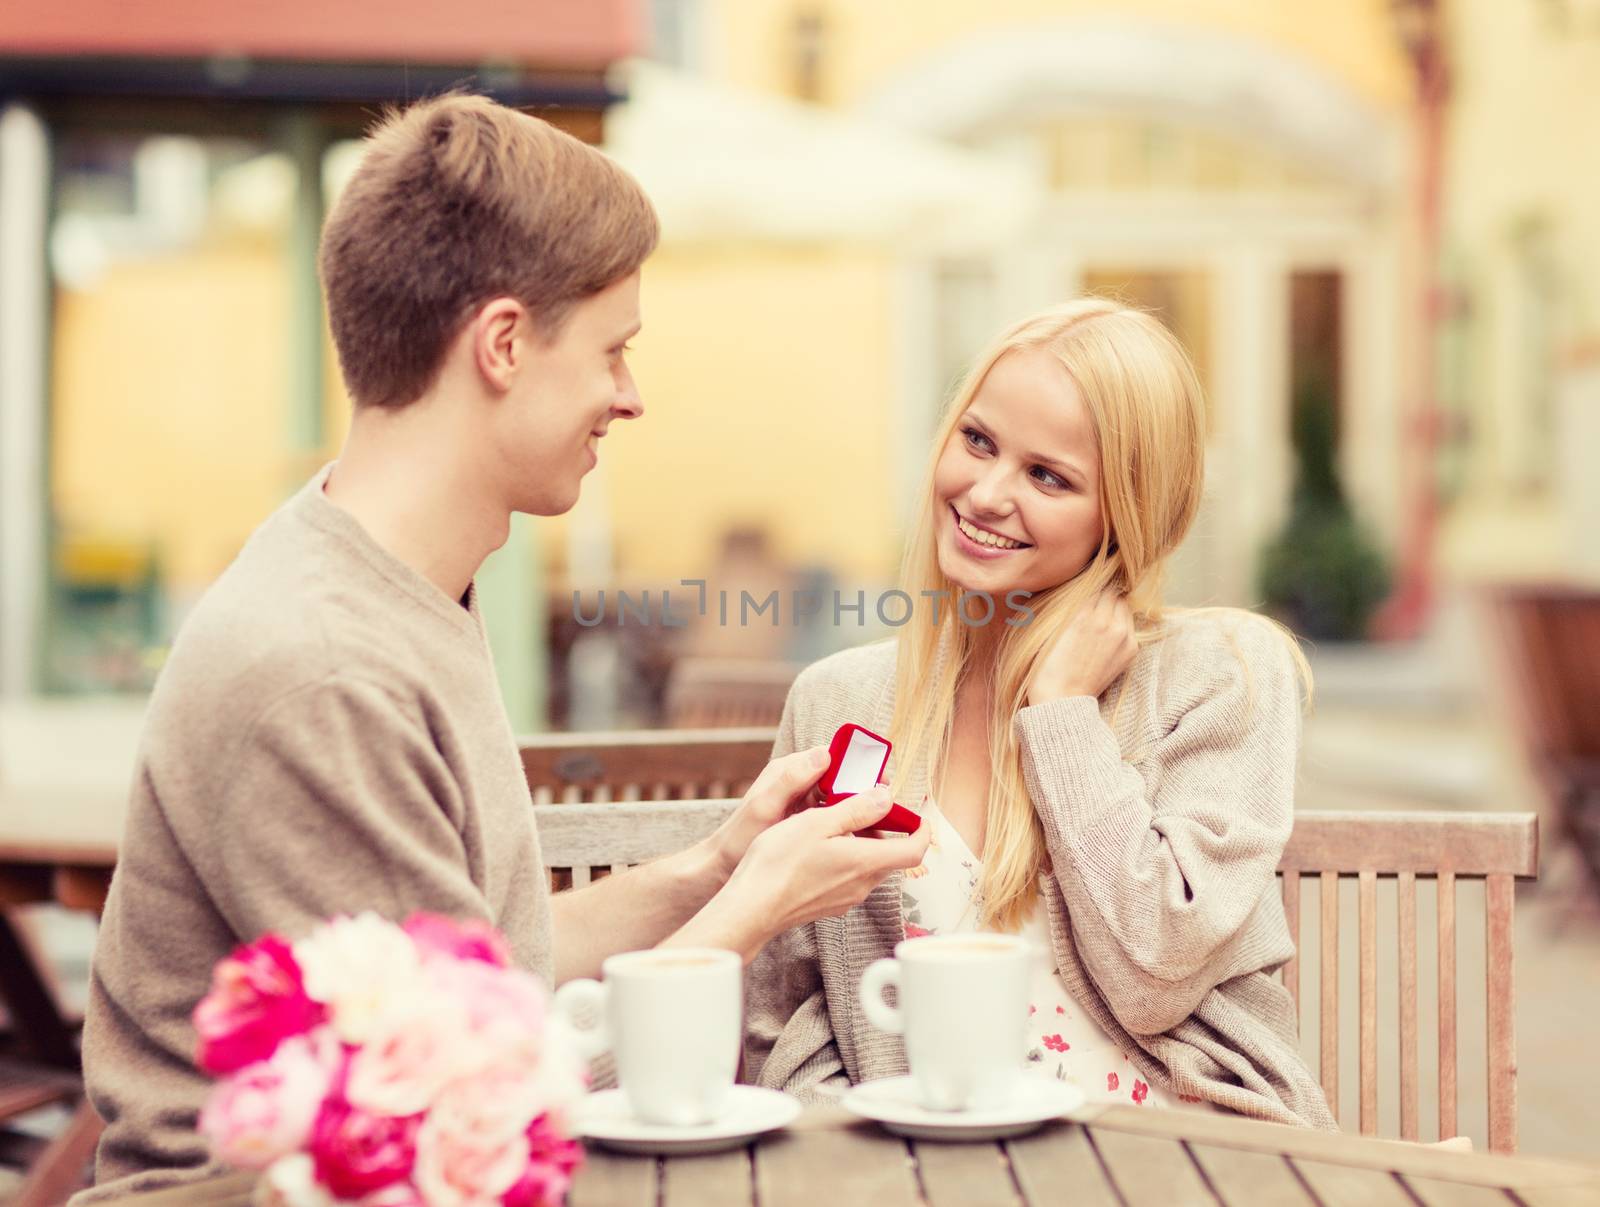 summer holidays, love, travel, tourism, relationship and dating concept - romantic man proposing to beautiful woman